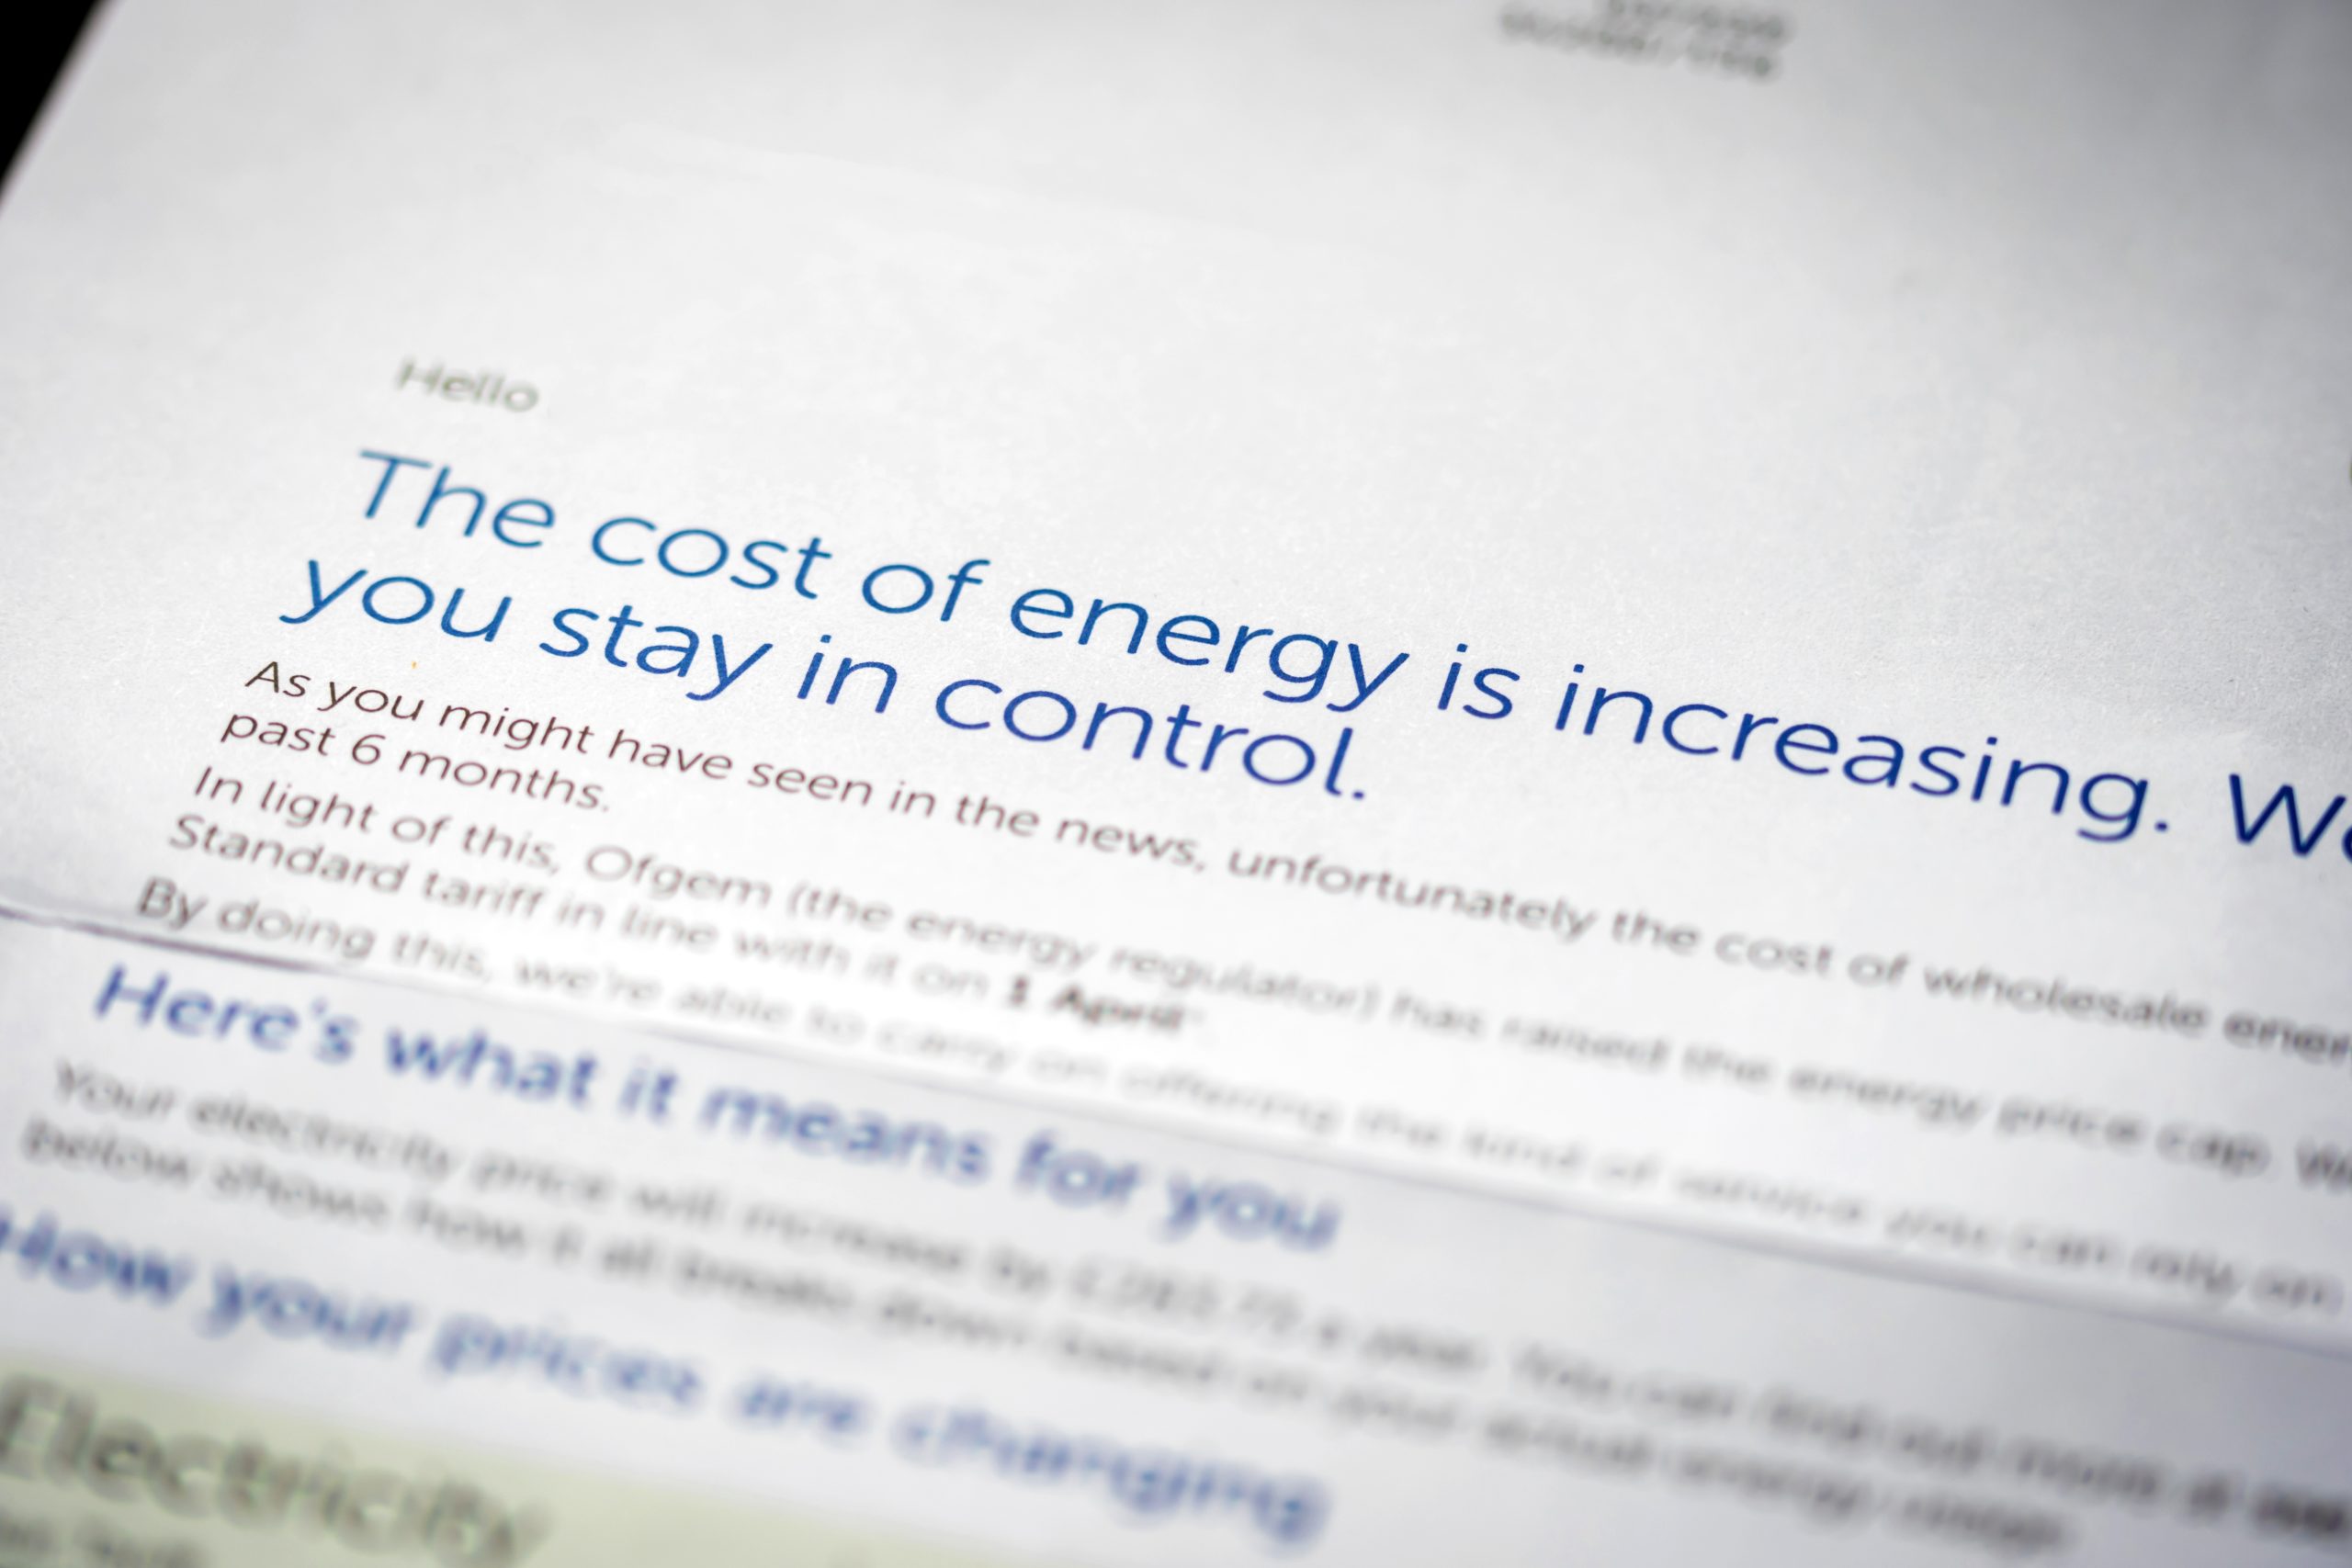 Paper bill informing a customer that their energy bill is increasing